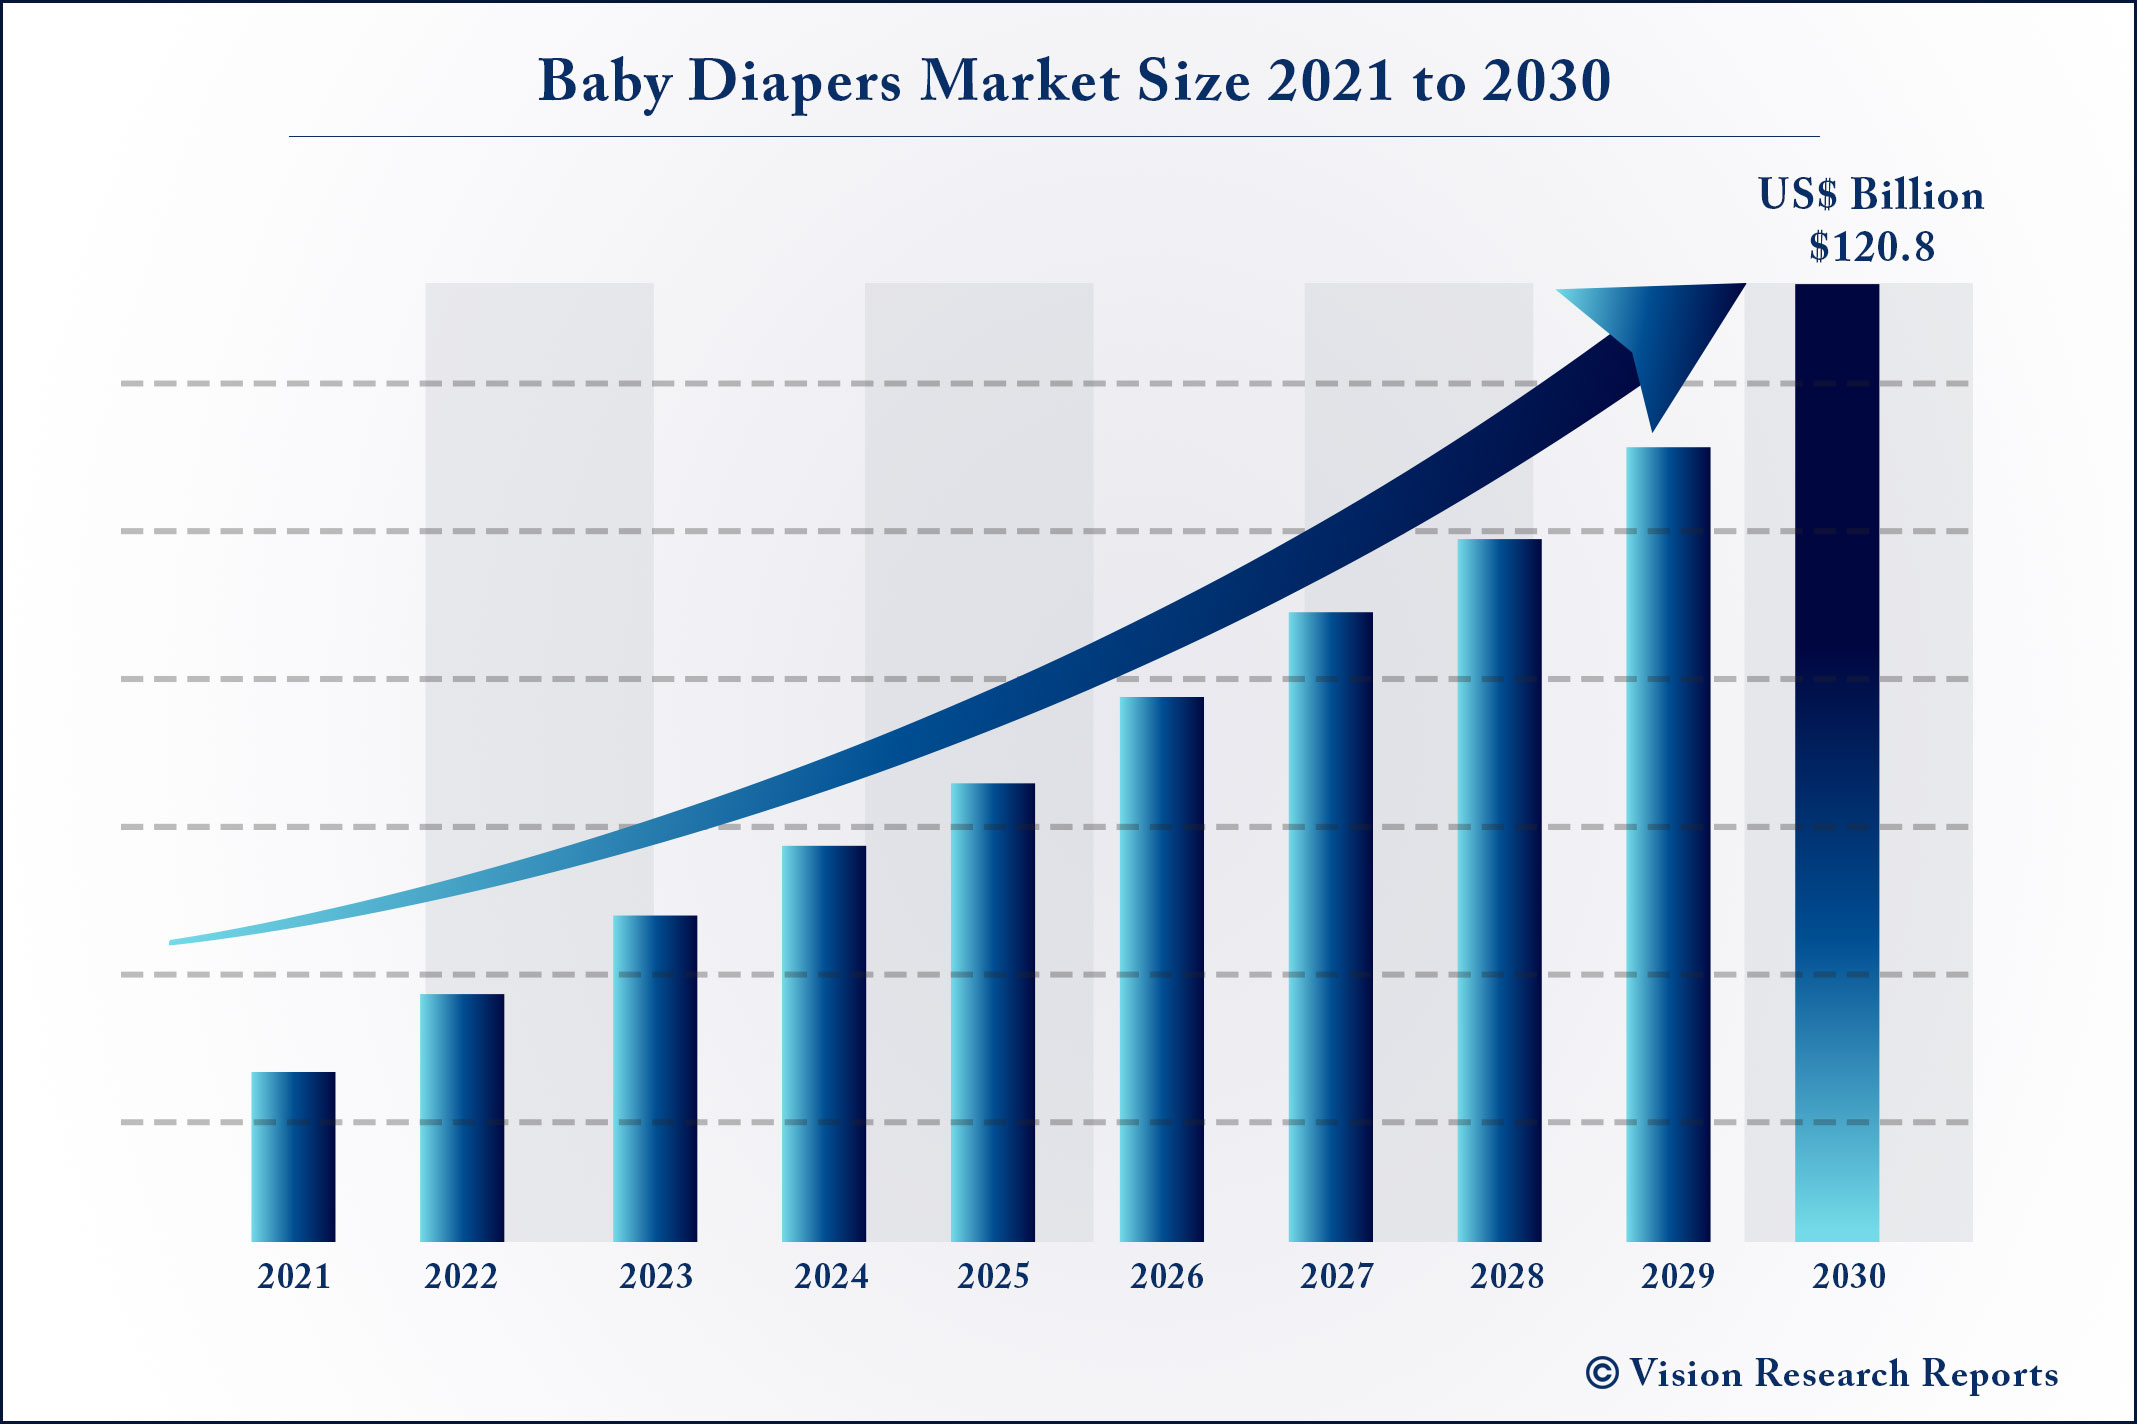 Baby Diapers Market Size 2021 to 2030